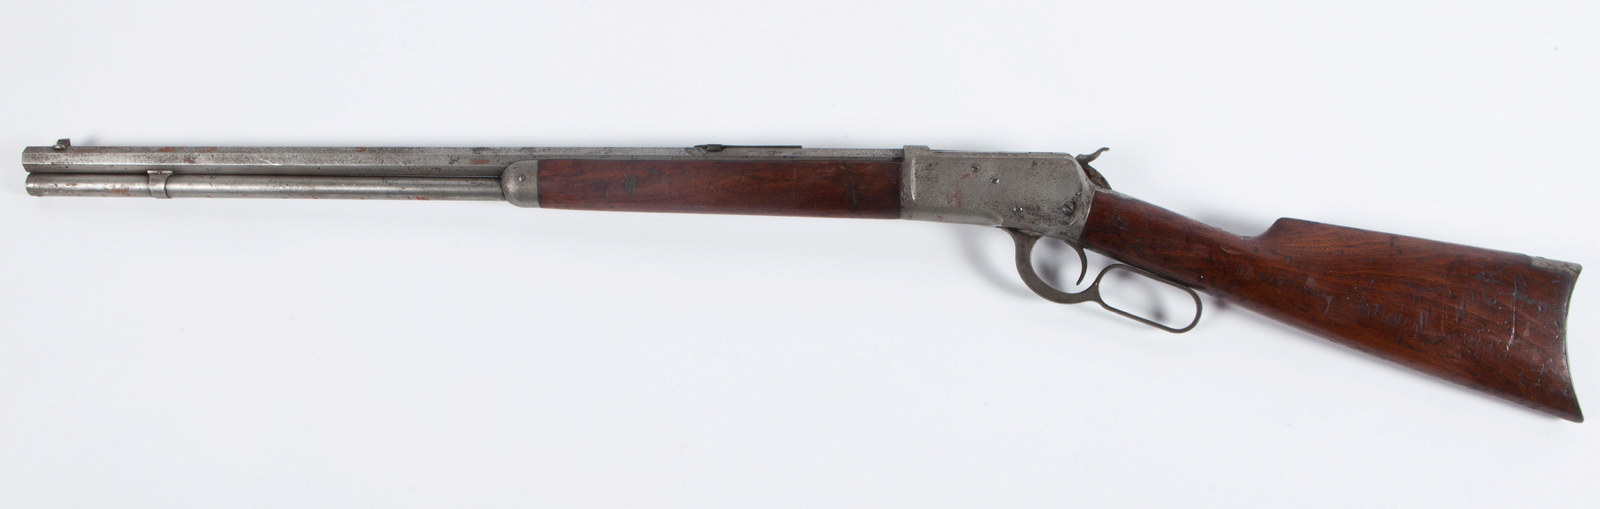 Winchester rifle used to murder Constable George Joseph Duncan, September 1916